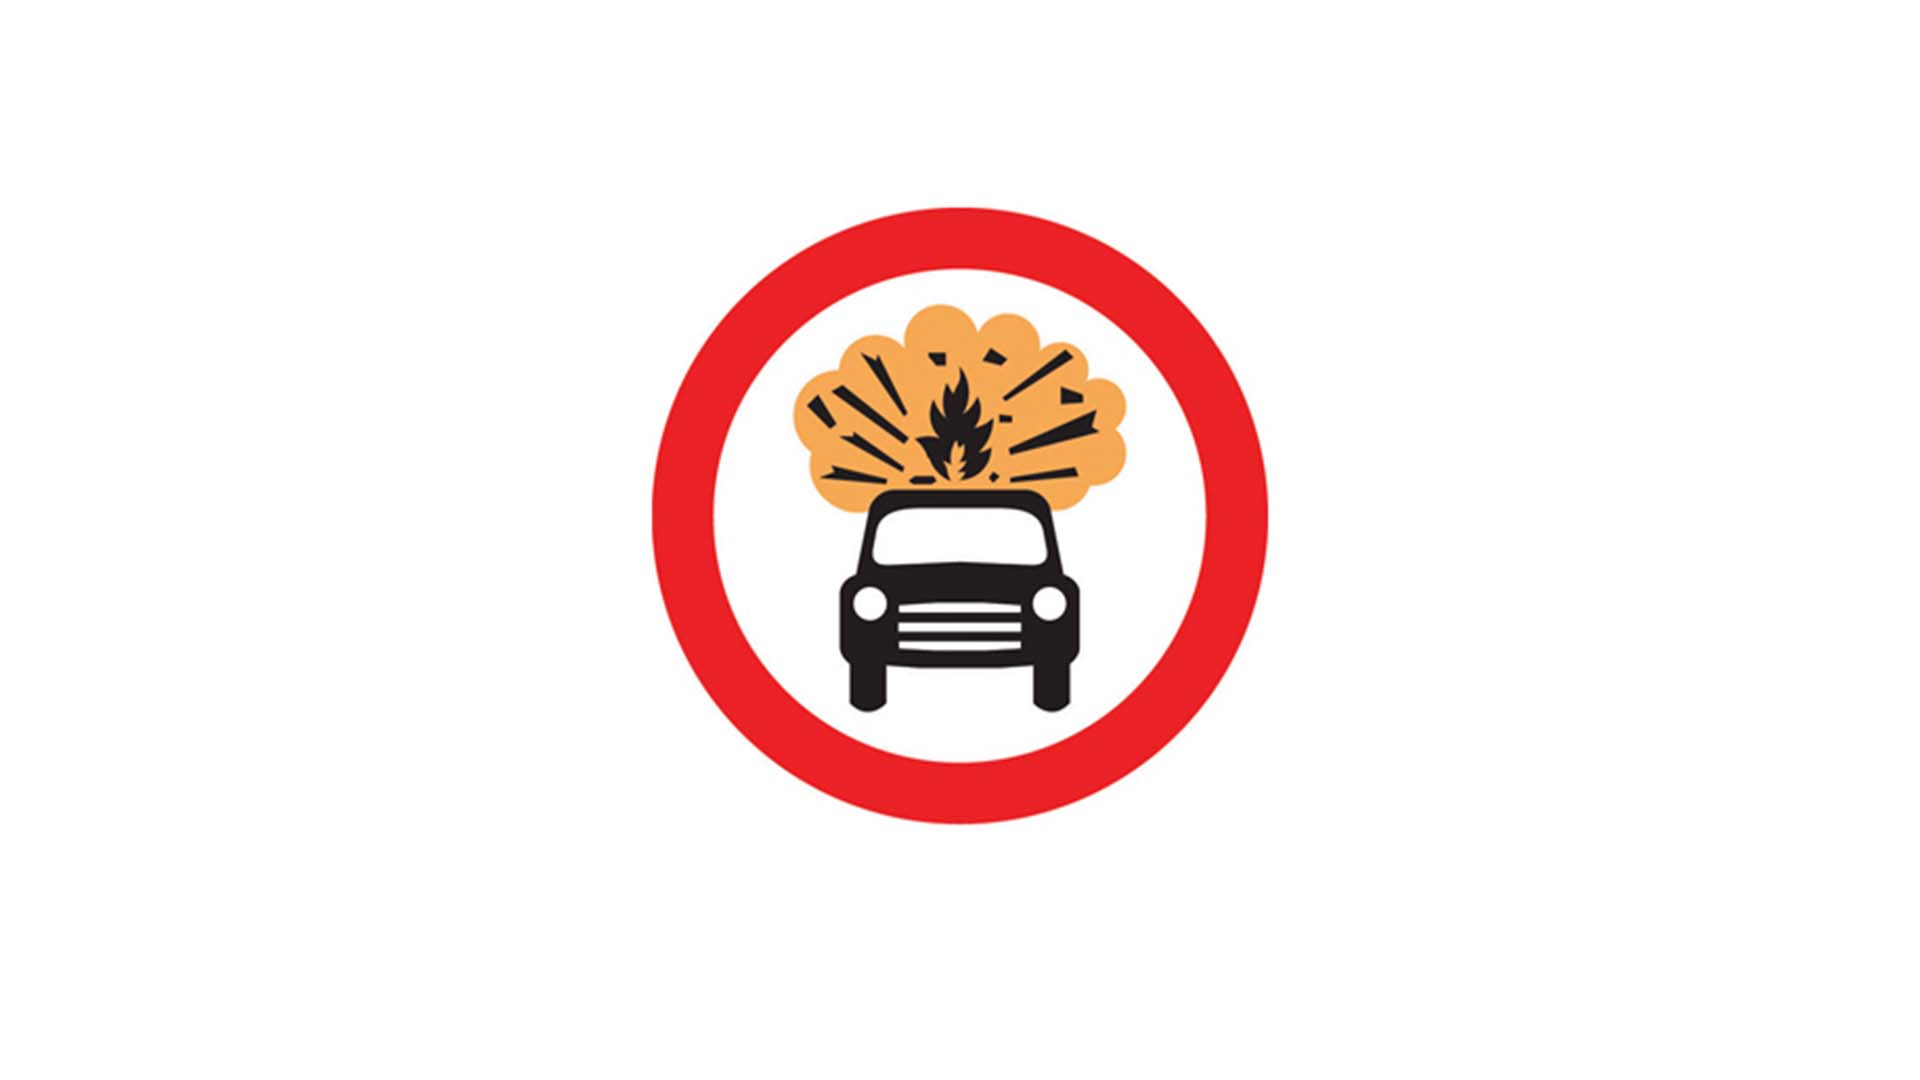 Vehicles carrying explosives prohibited